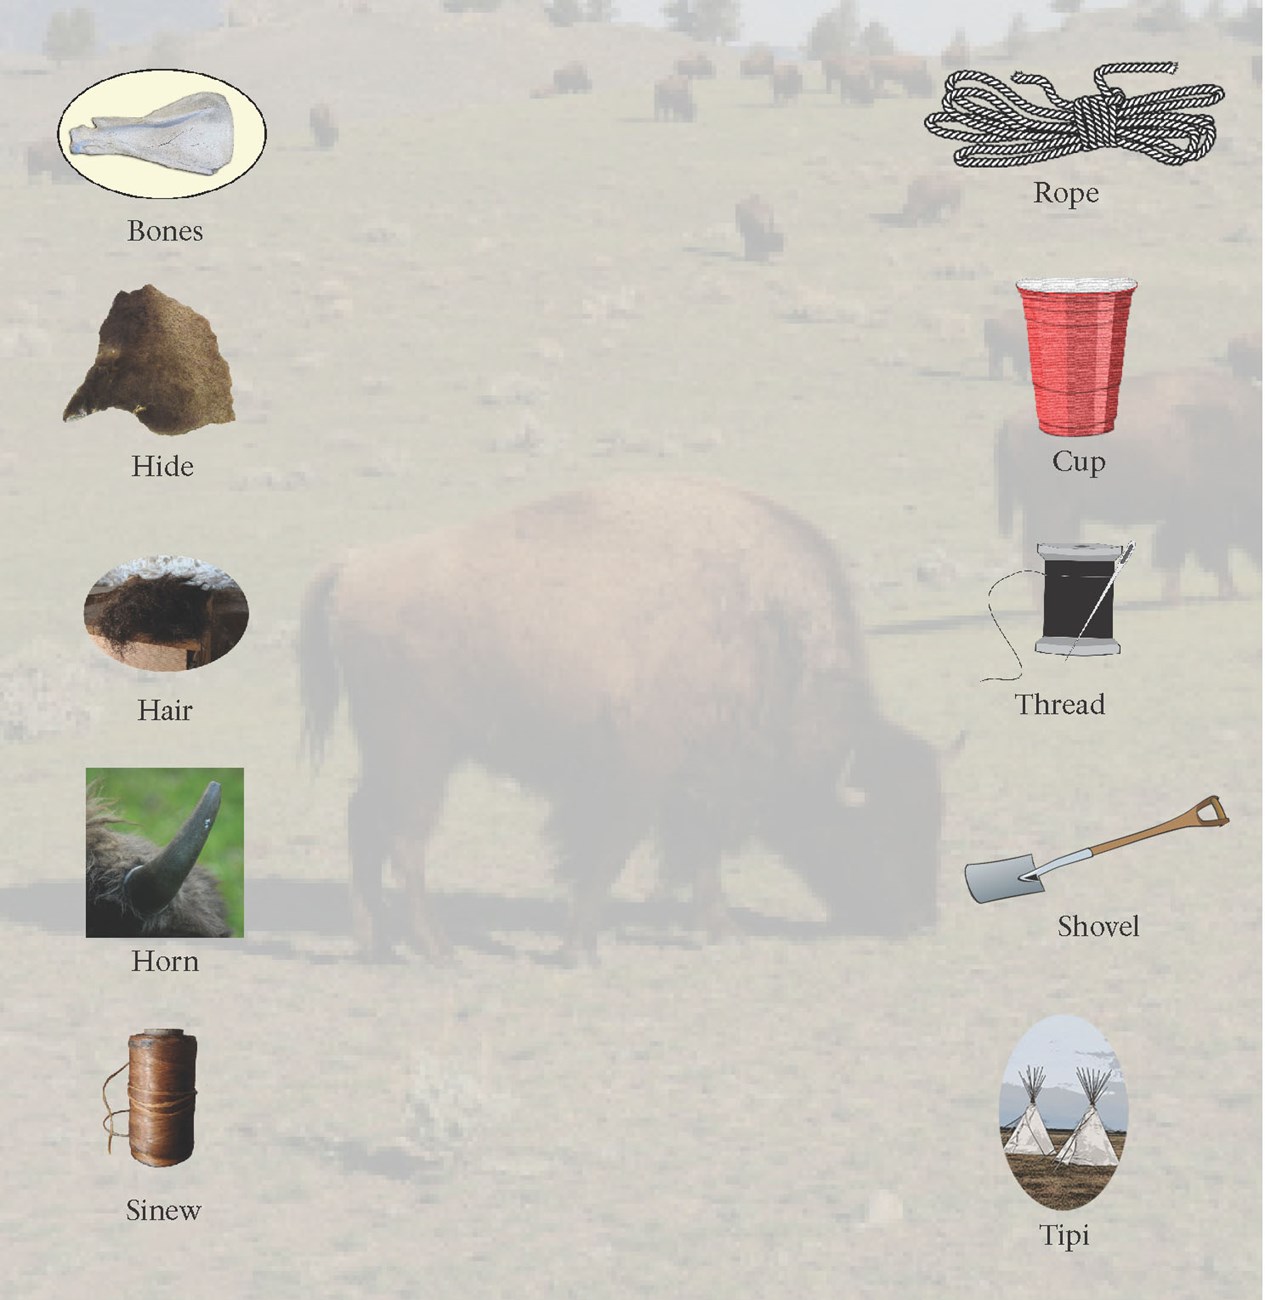 Image with bison in background and different items to match on the right and left.